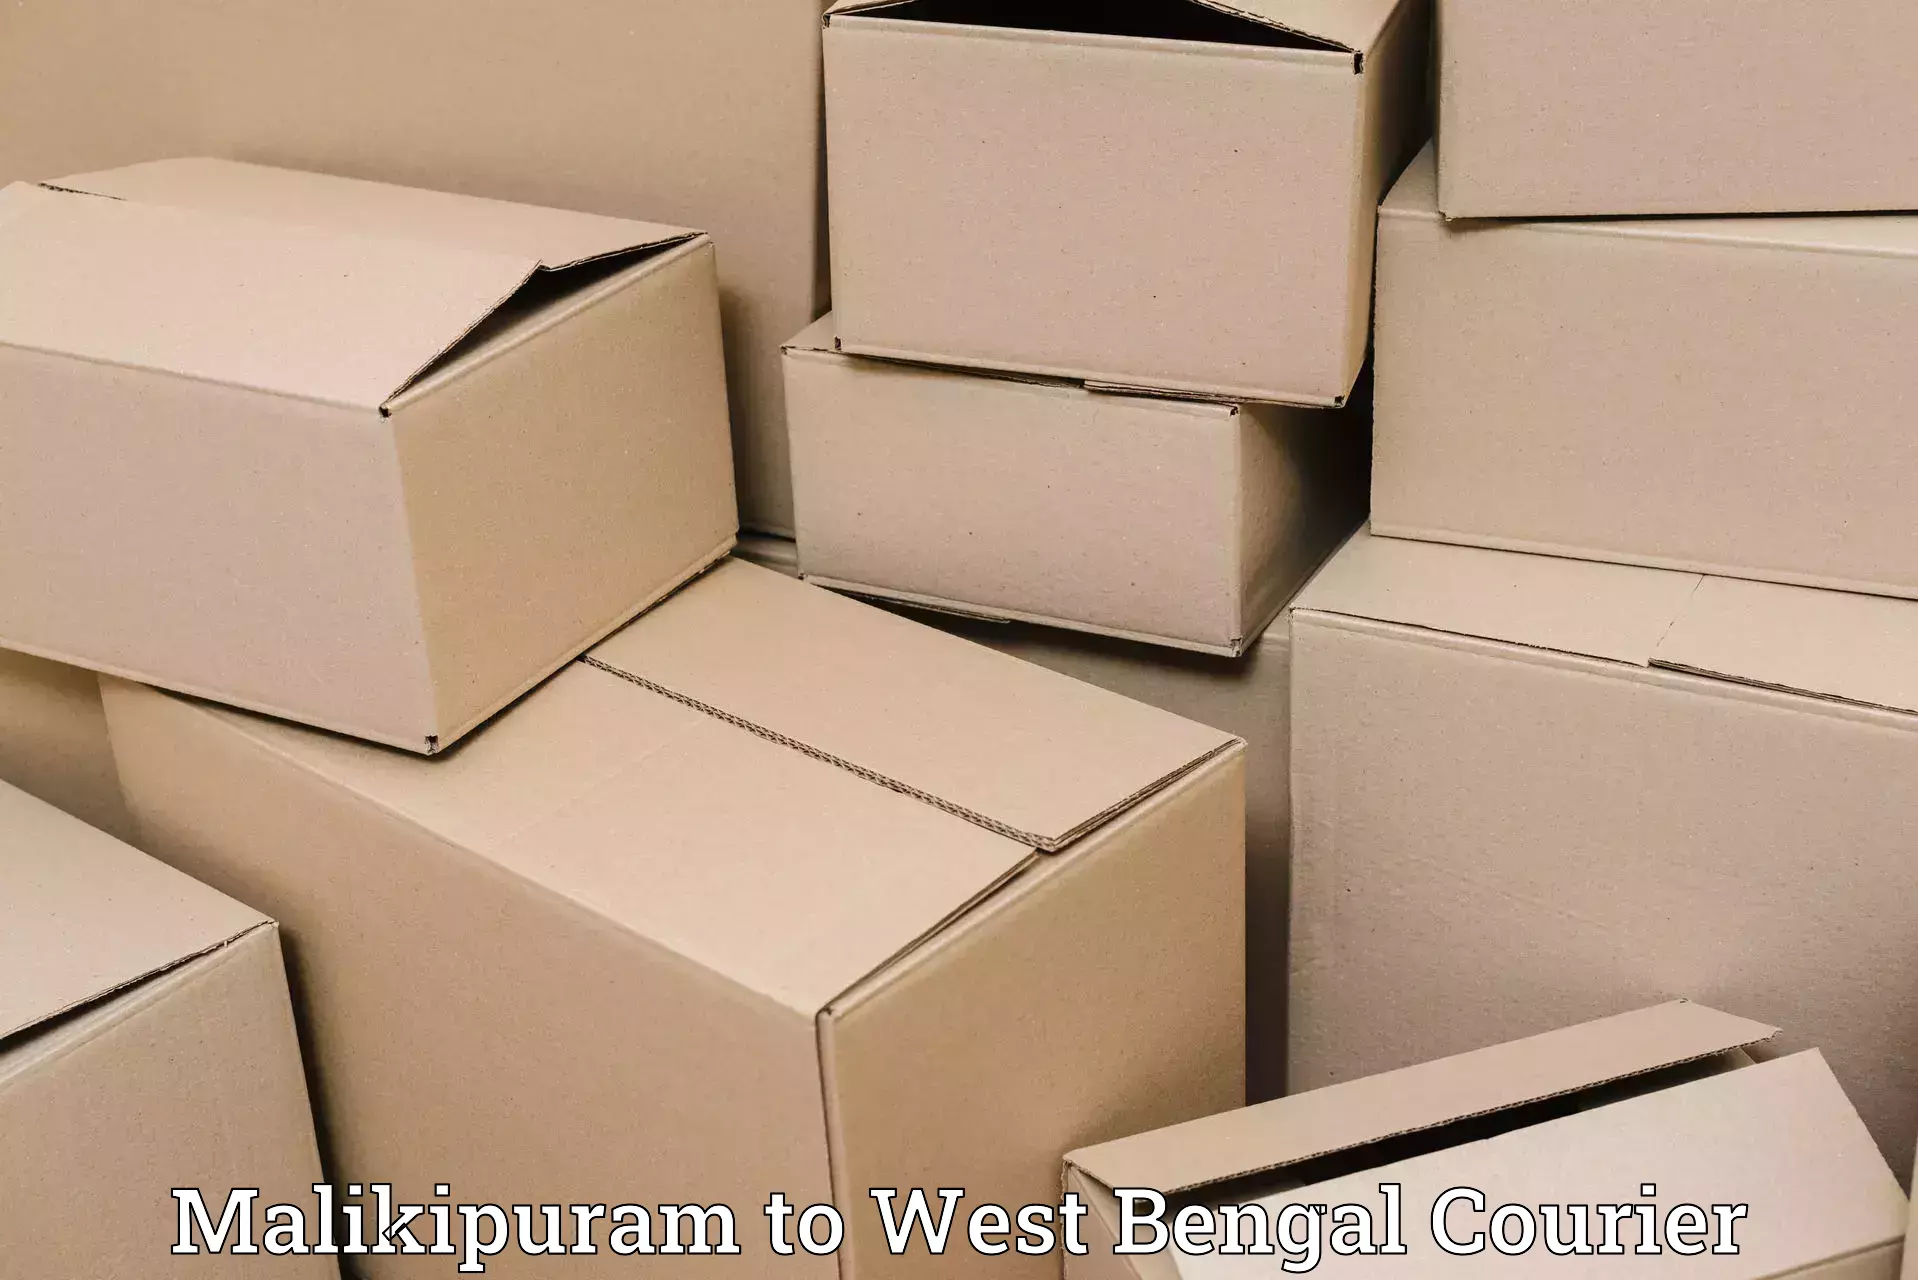 Flexible delivery schedules in Malikipuram to West Bengal